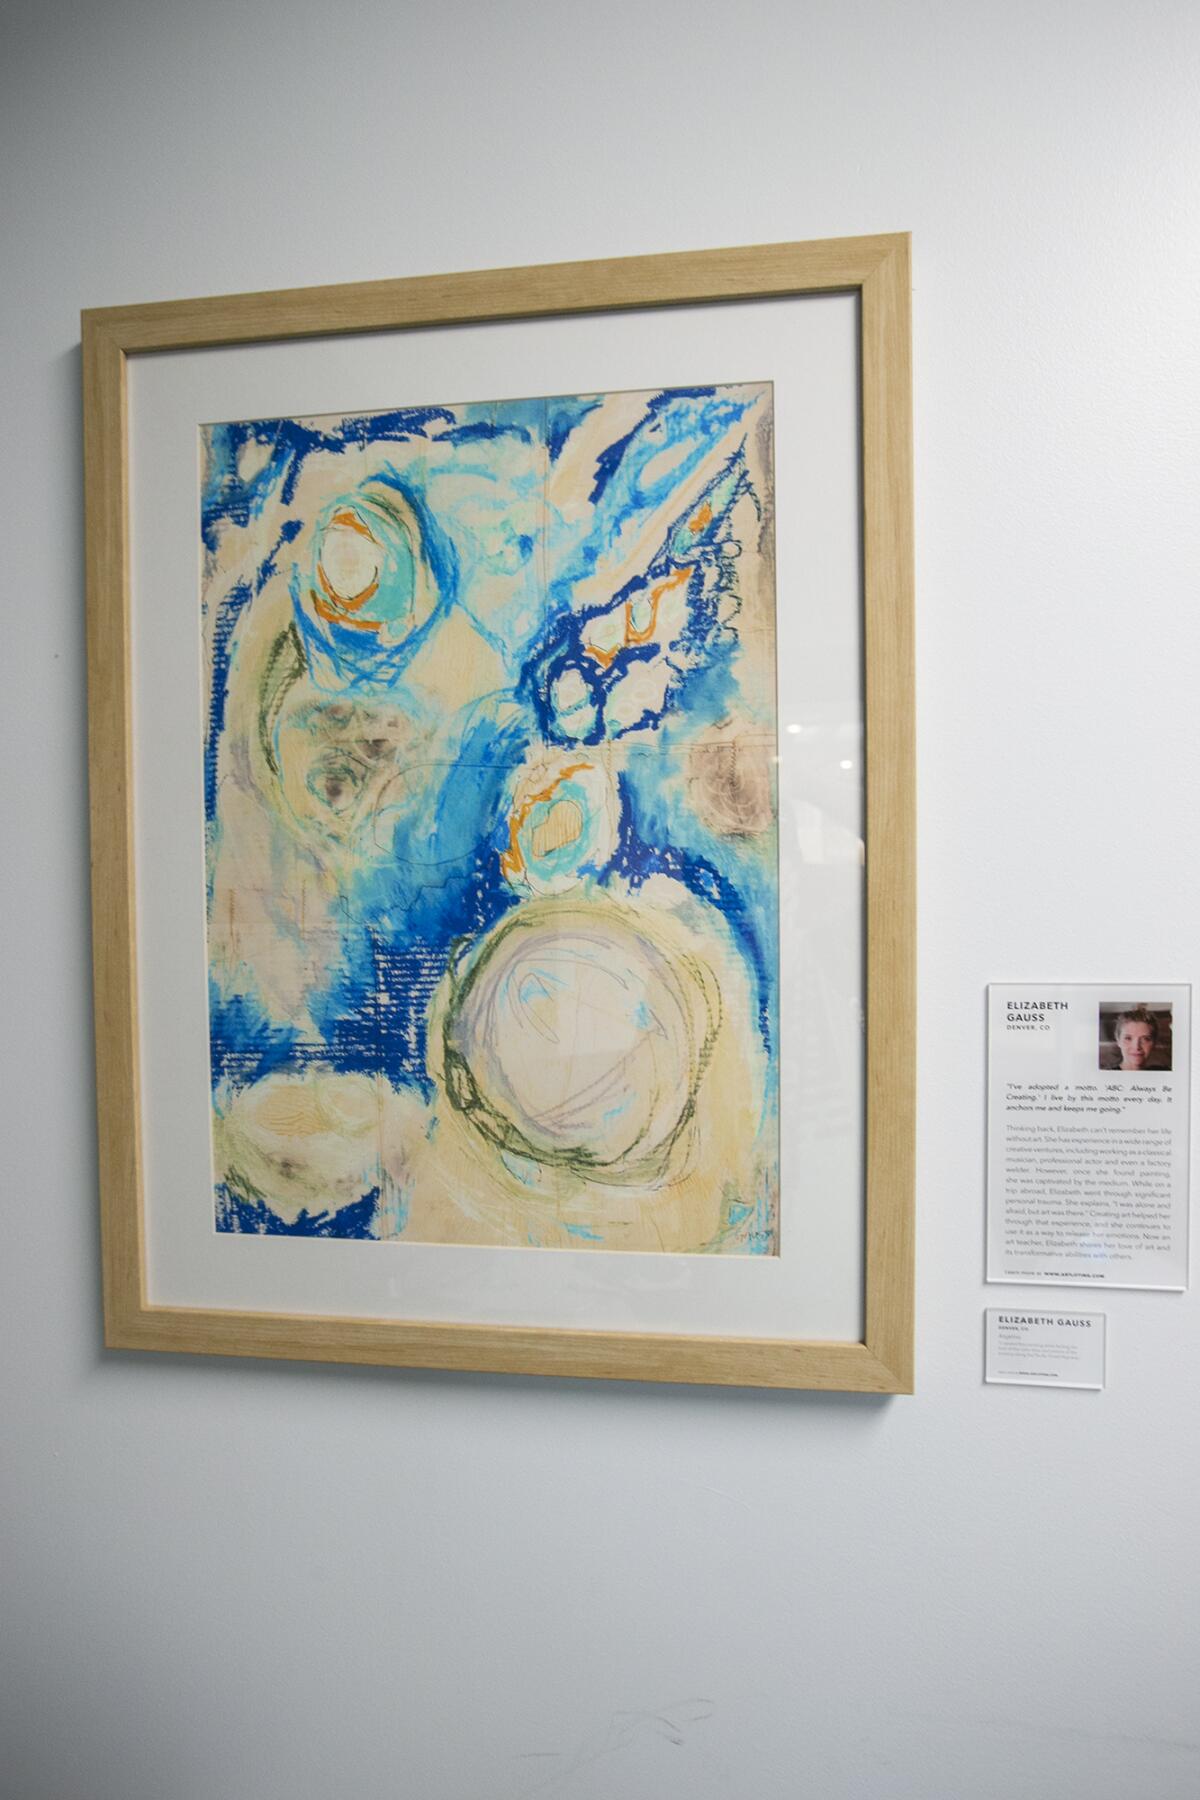 A piece by ArtLifting artist Elizabeth Gauss from Denver hangs in an office at the Bank of America in Huntington Beach.